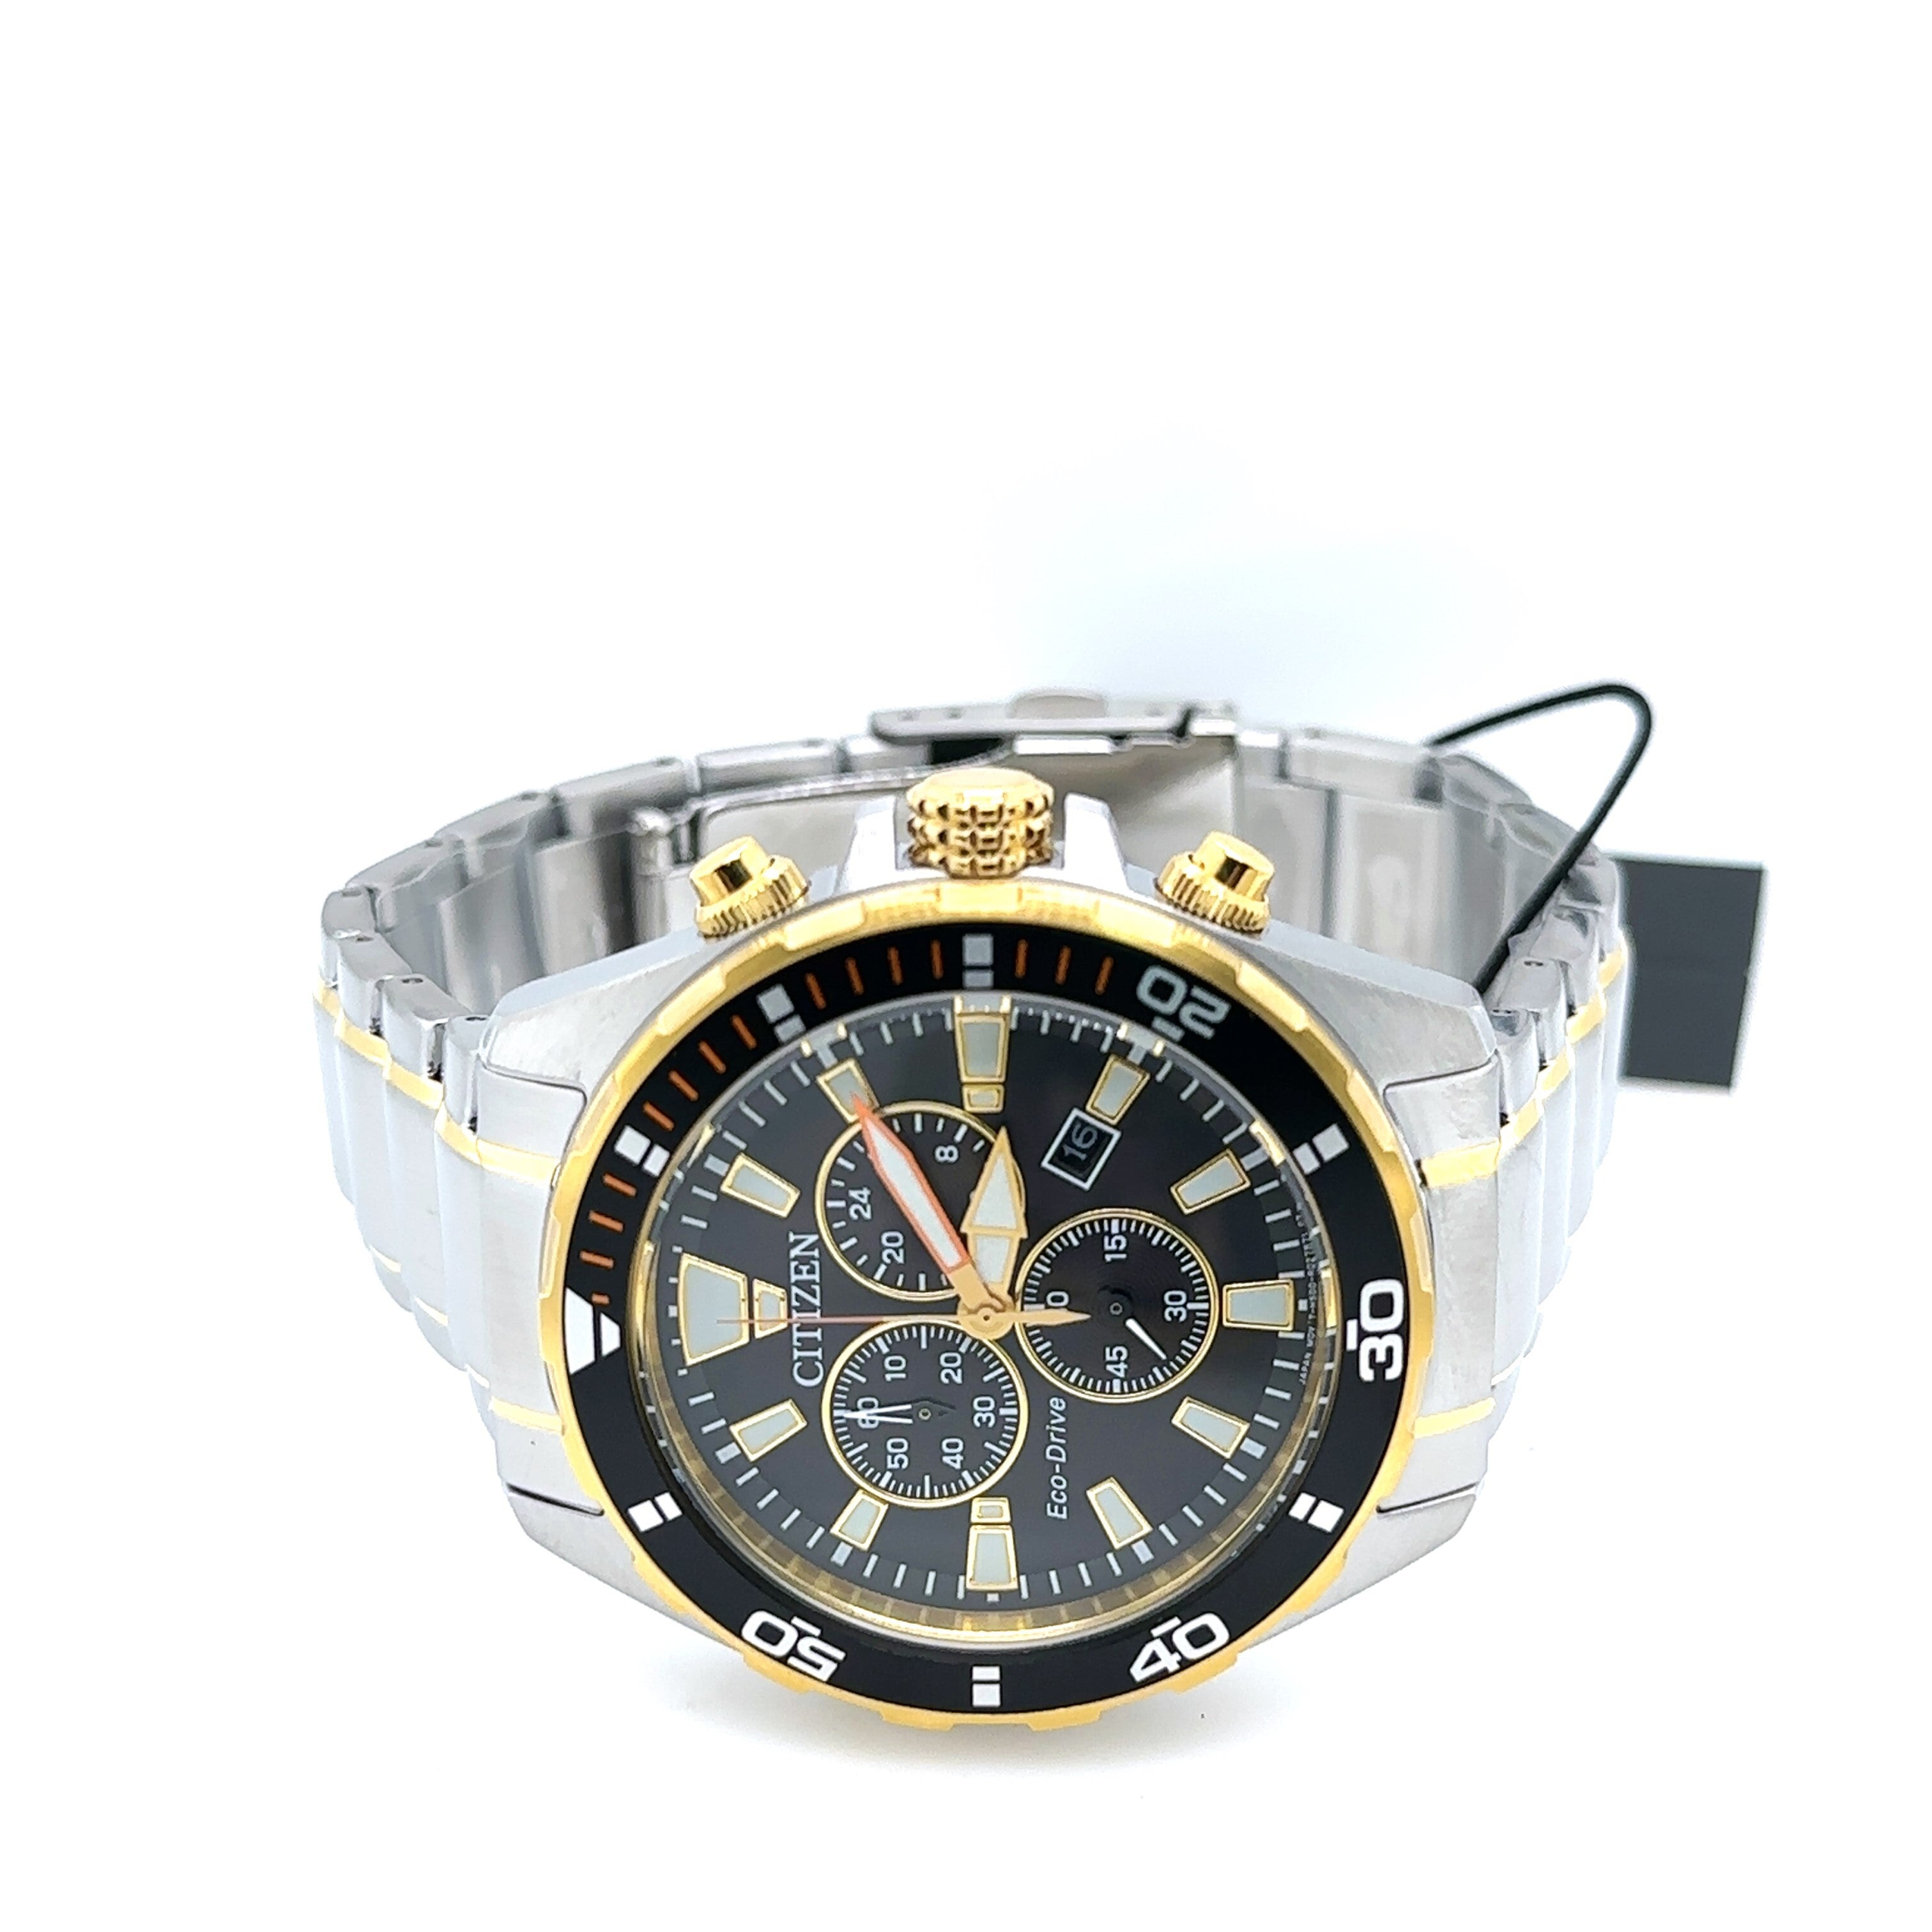 Citizen Eco Drive Chronograph 44mm Black Dial Stainless Steel